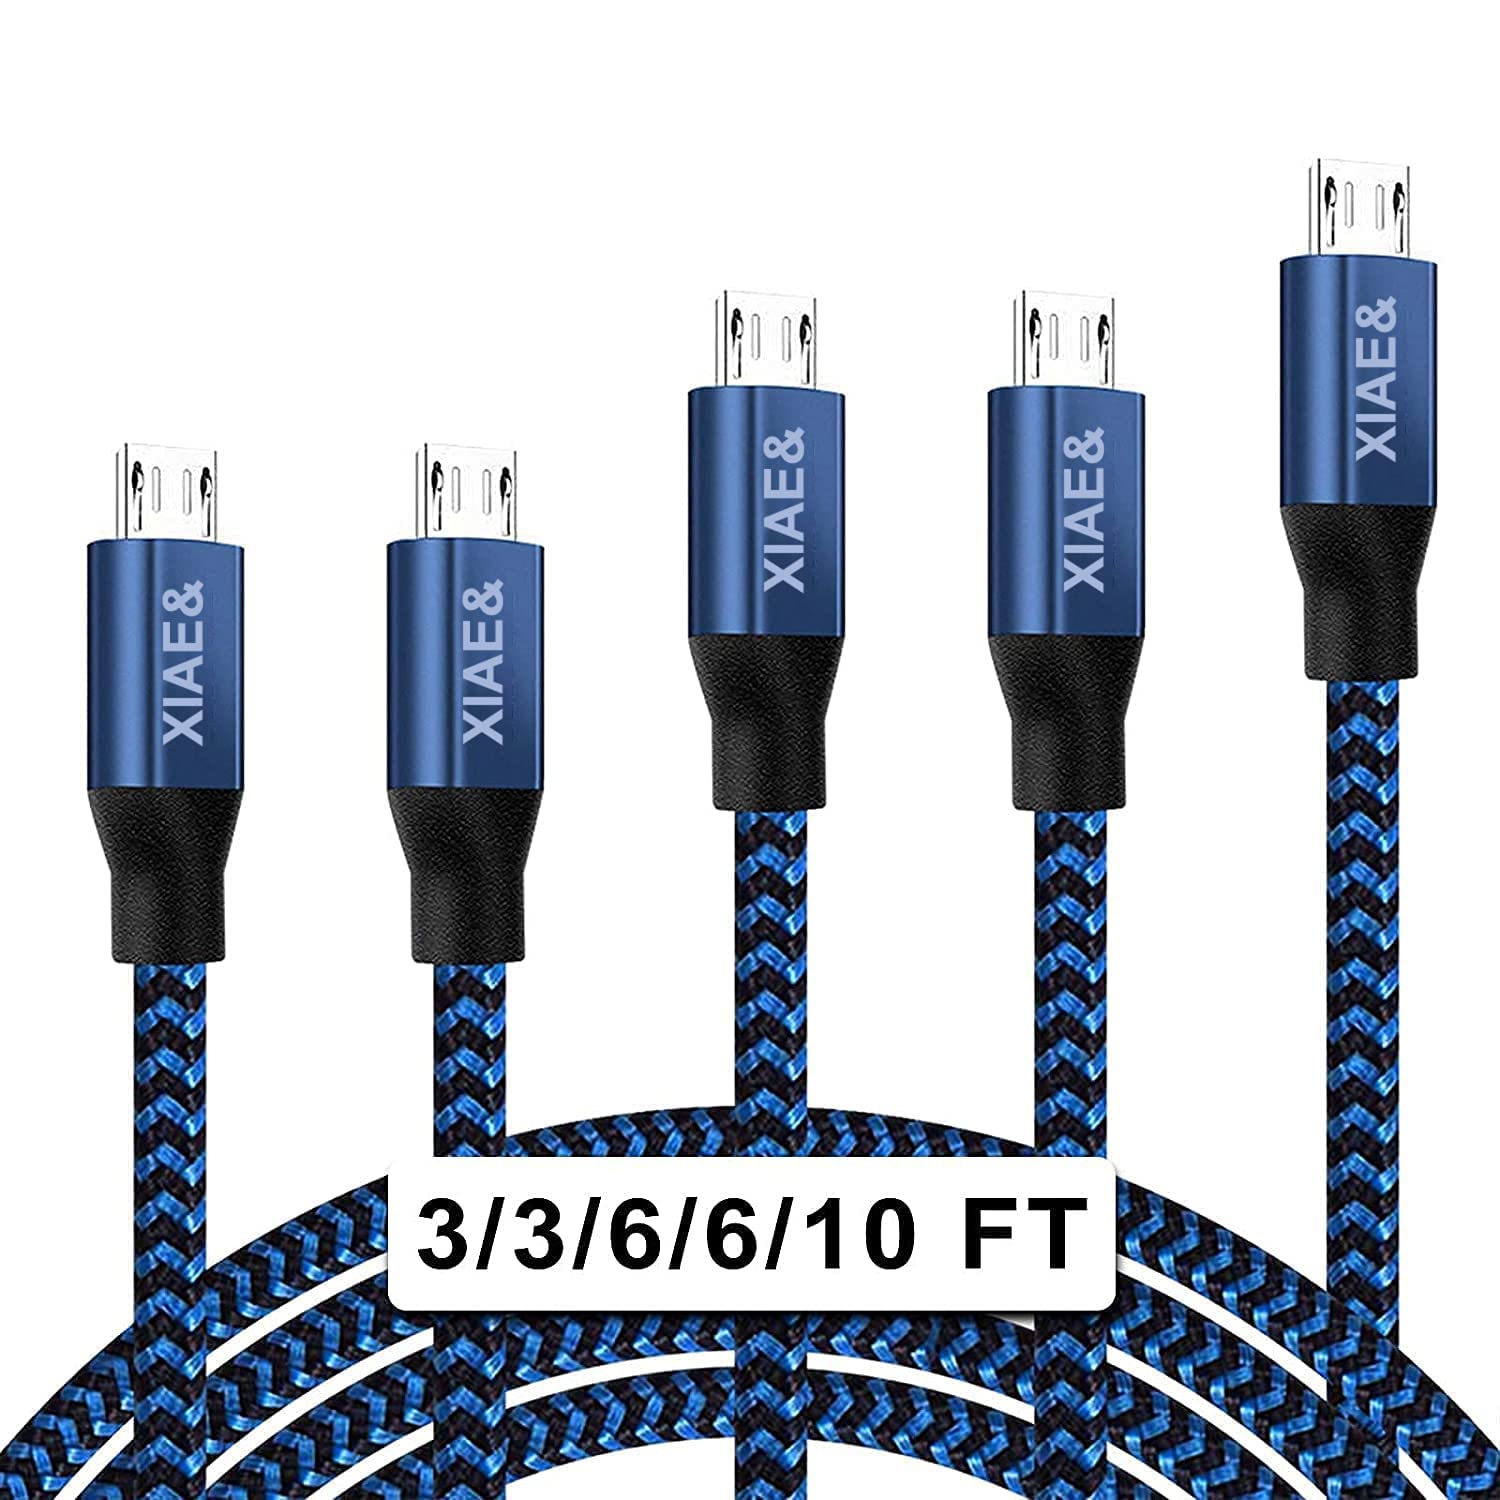 Micro USB Cable,XIAE& 5Pack (3/3/6/6/10FT) Nylon [...]